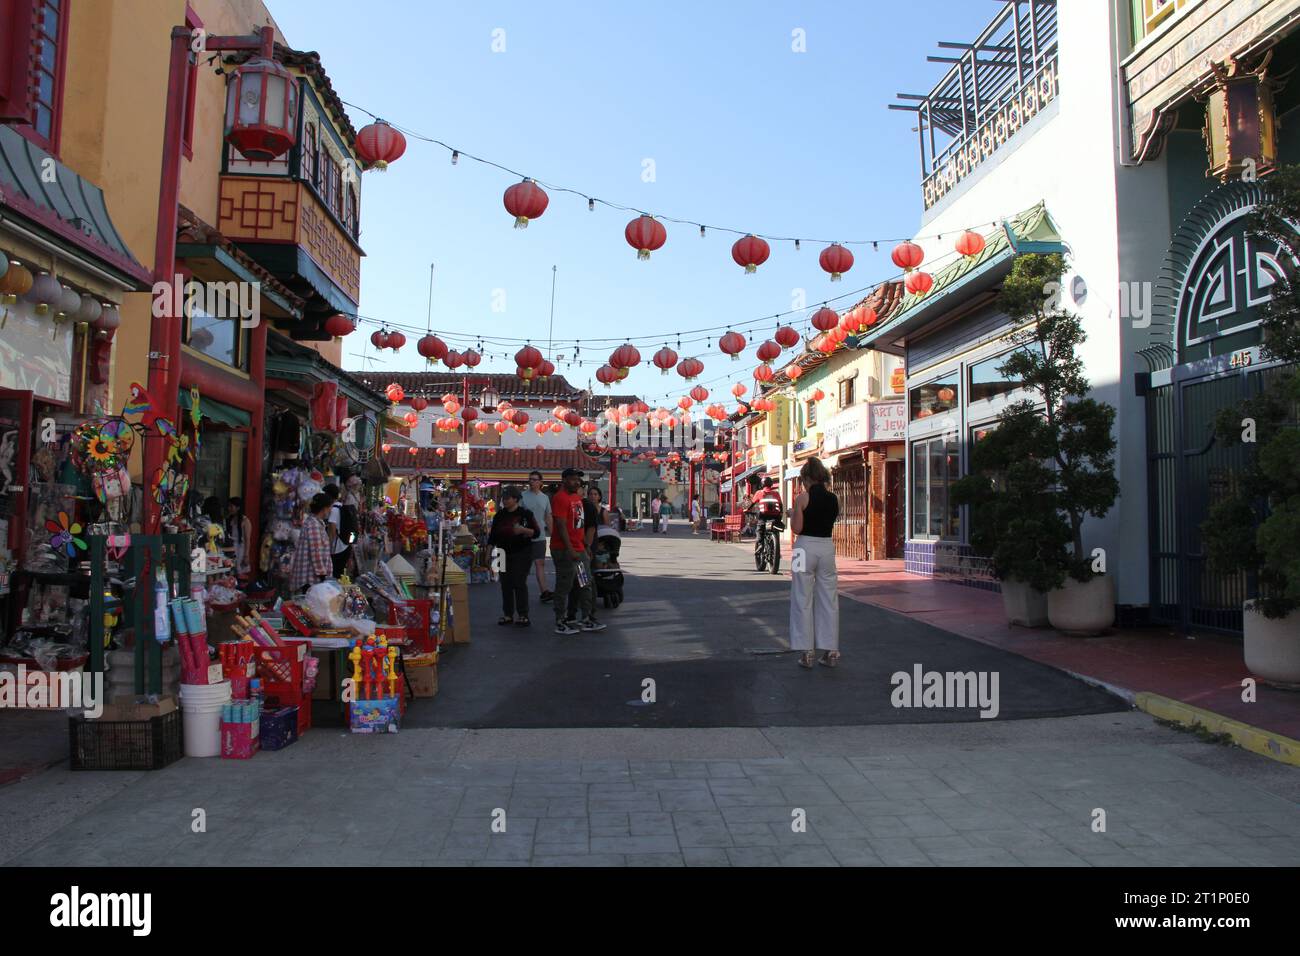 Chinatown Plaza Los Angeles CA Shoppers Pass Outside Market Display Stock Photo